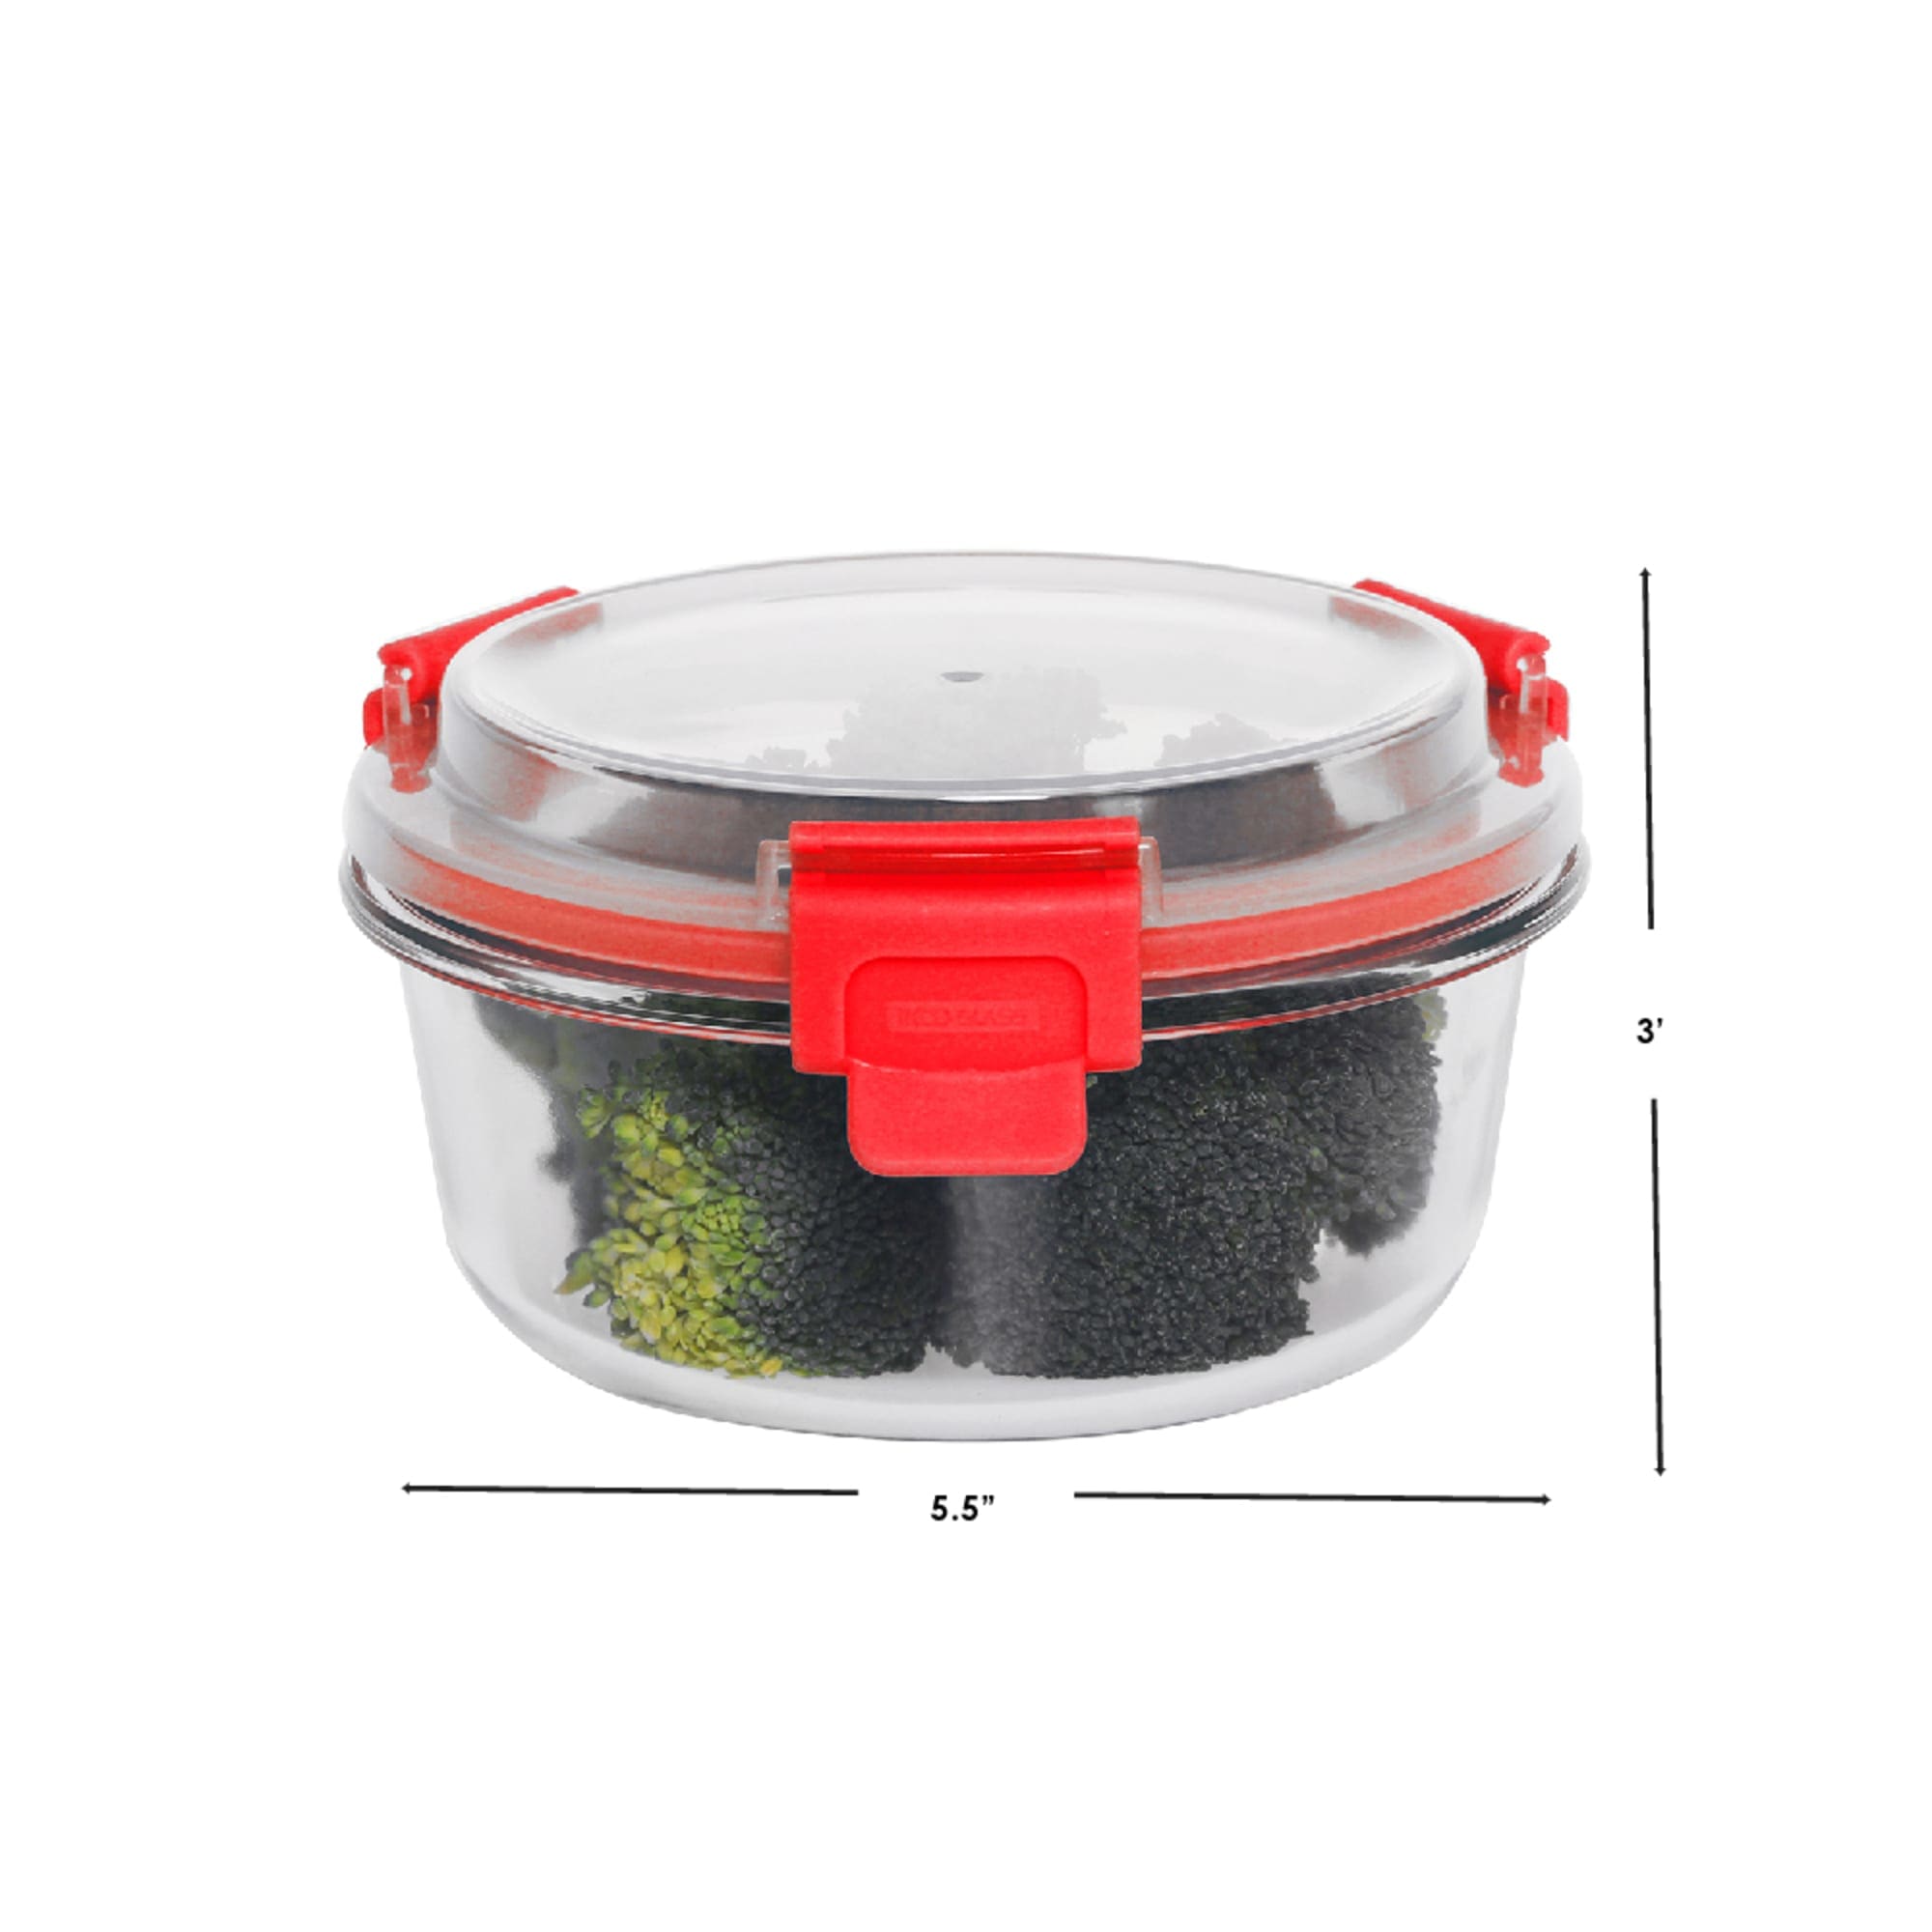 Home Basics 13oz. Round Borosilicate Glass Food Storage Container, Red $4.00 EACH, CASE PACK OF 12